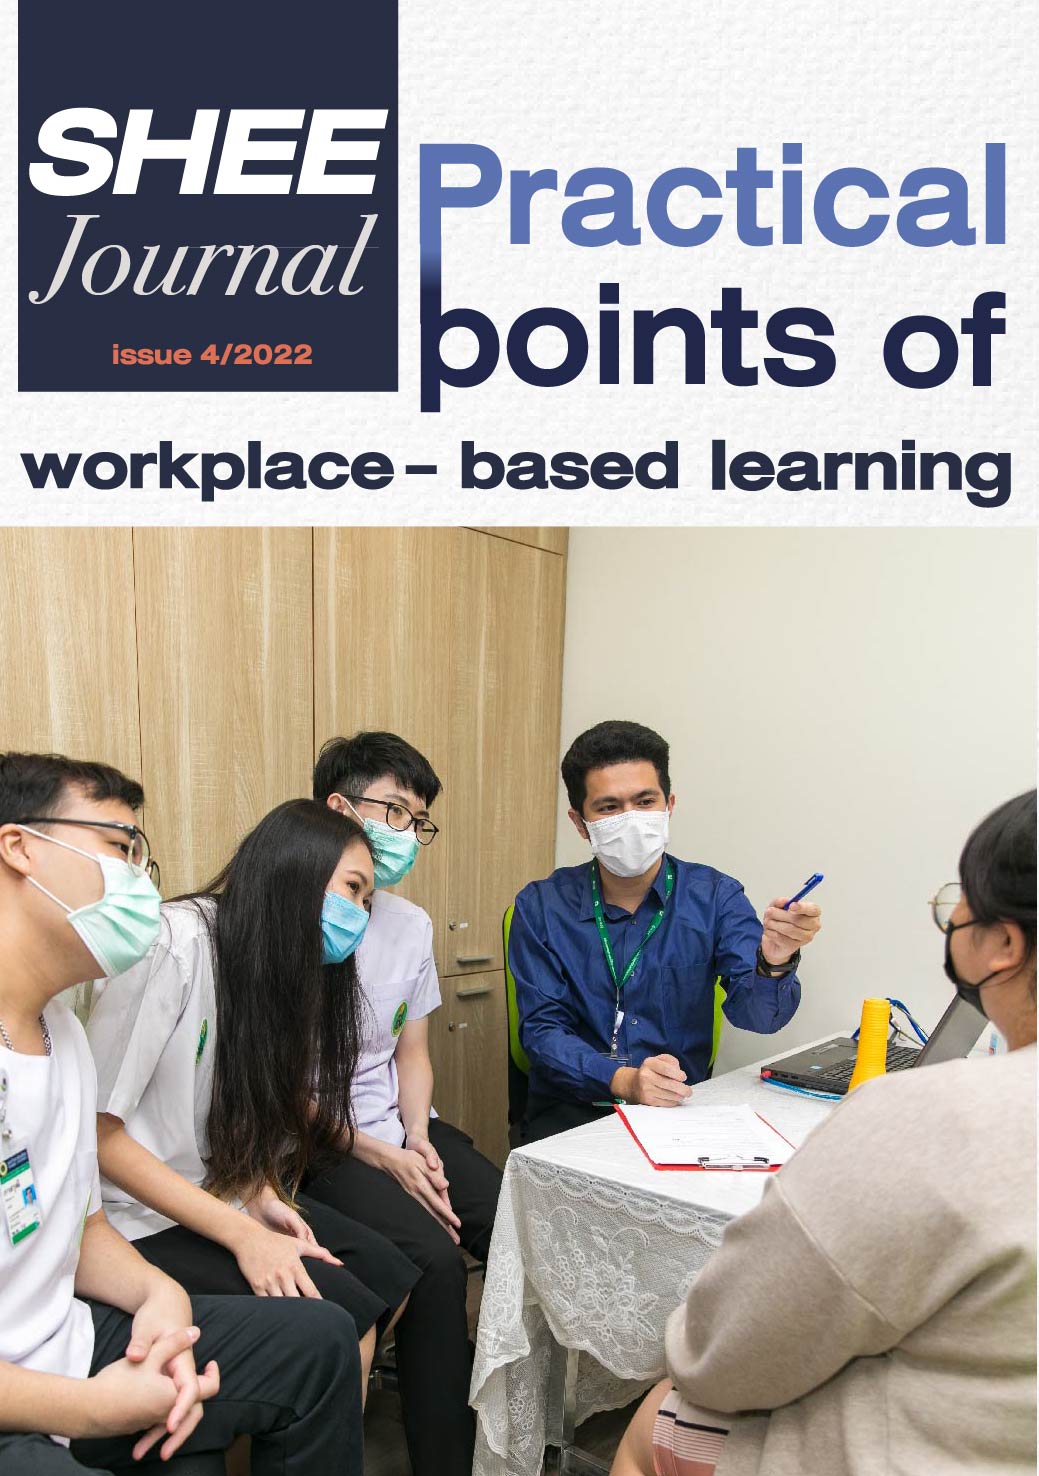 Journal Issue 4, 2022 เรื่อง Practical points of workplace-based learning